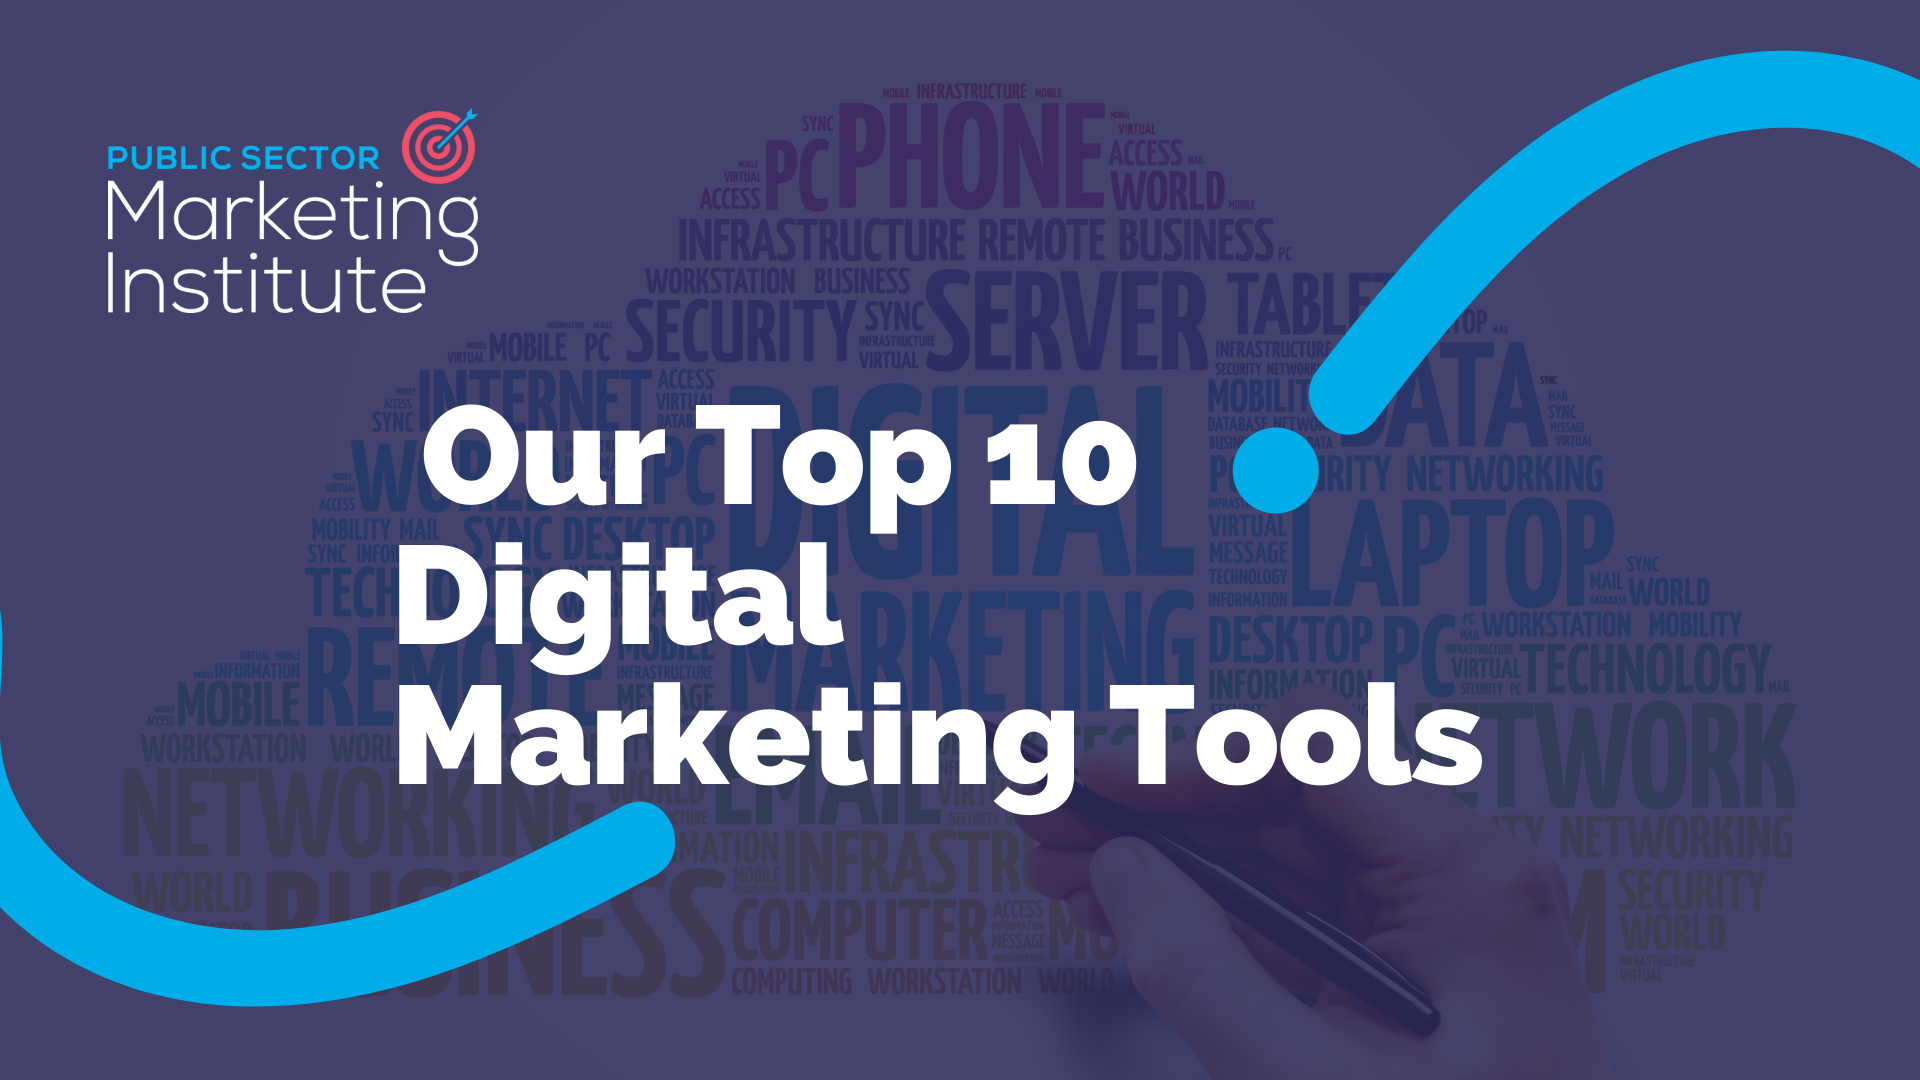 Our Top 10 Digital Marketing Tools